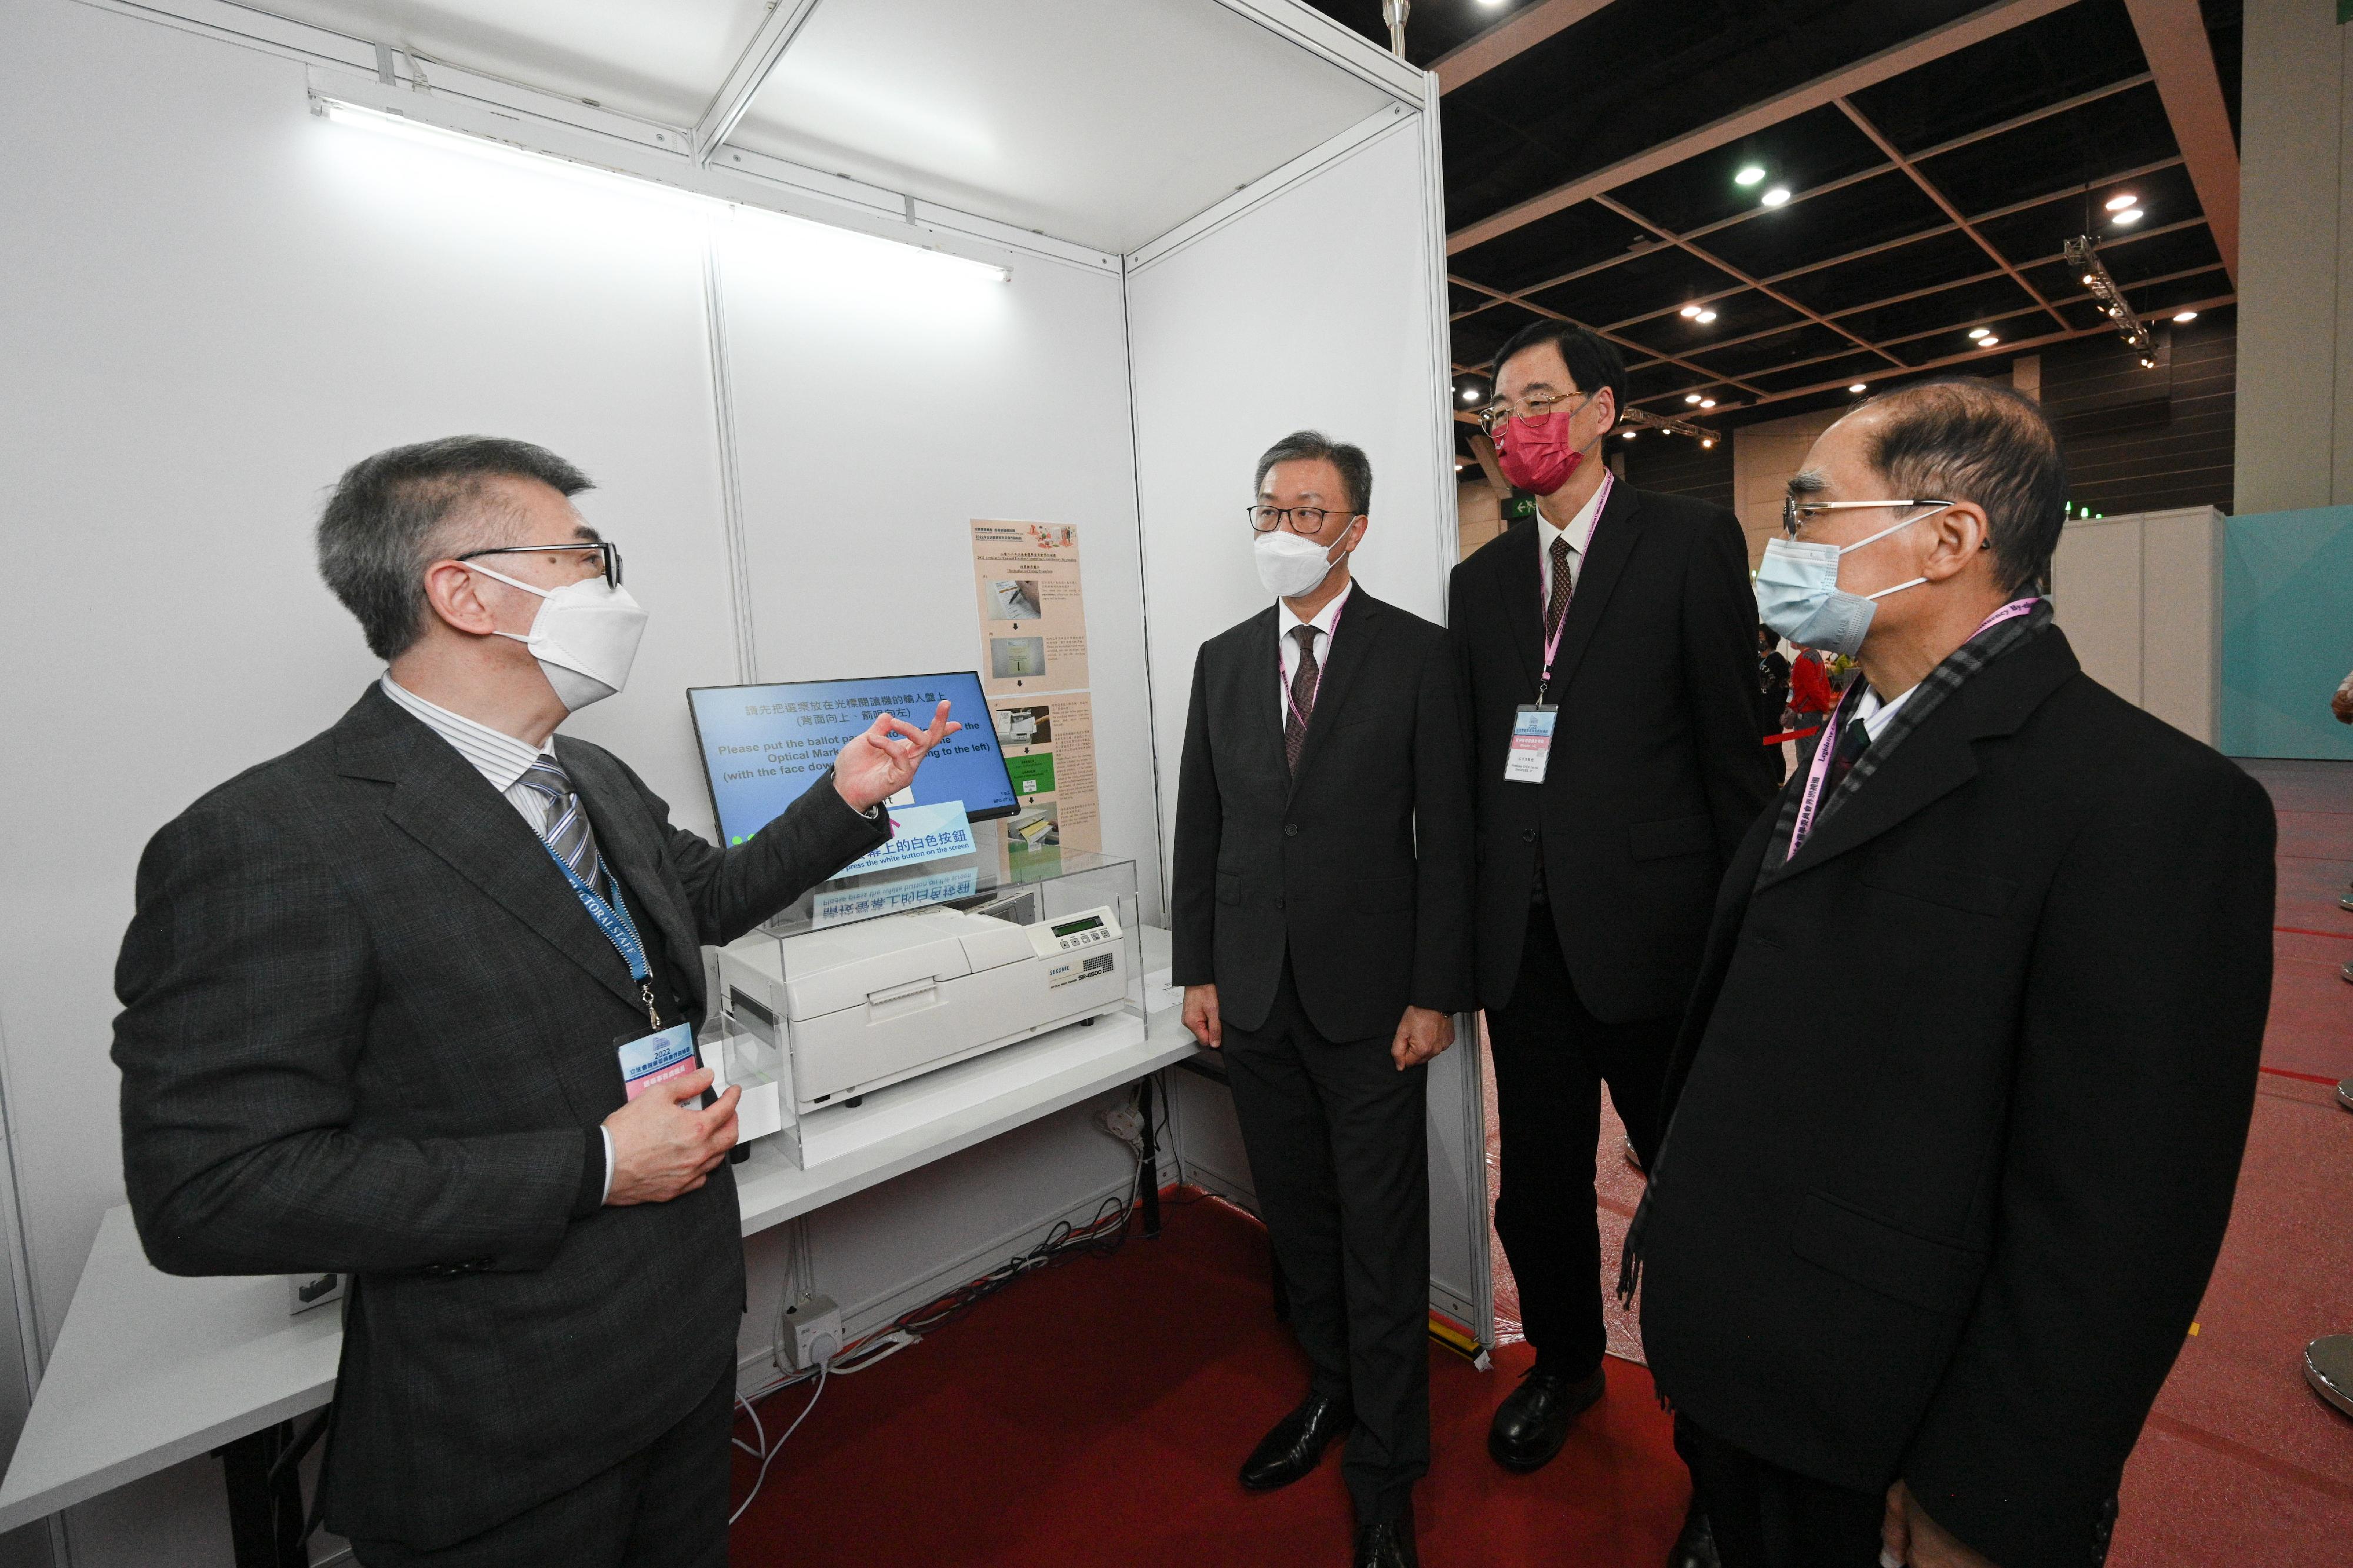 The Chairman of the Electoral Affairs Commission (EAC), Mr Justice David Lok (second left), EAC members Mr Arthur Luk, SC (first right), and Professor Daniel Shek (second right) were briefed by the Chief Electoral Officer of the Registration and Electoral Office, Mr Raymond Wang (first left), on the checking machines during their visit to the polling station of the 2022 Legislative Council Election Committee constituency by-election at the Hong Kong Convention and Exhibition Centre today (December 16).